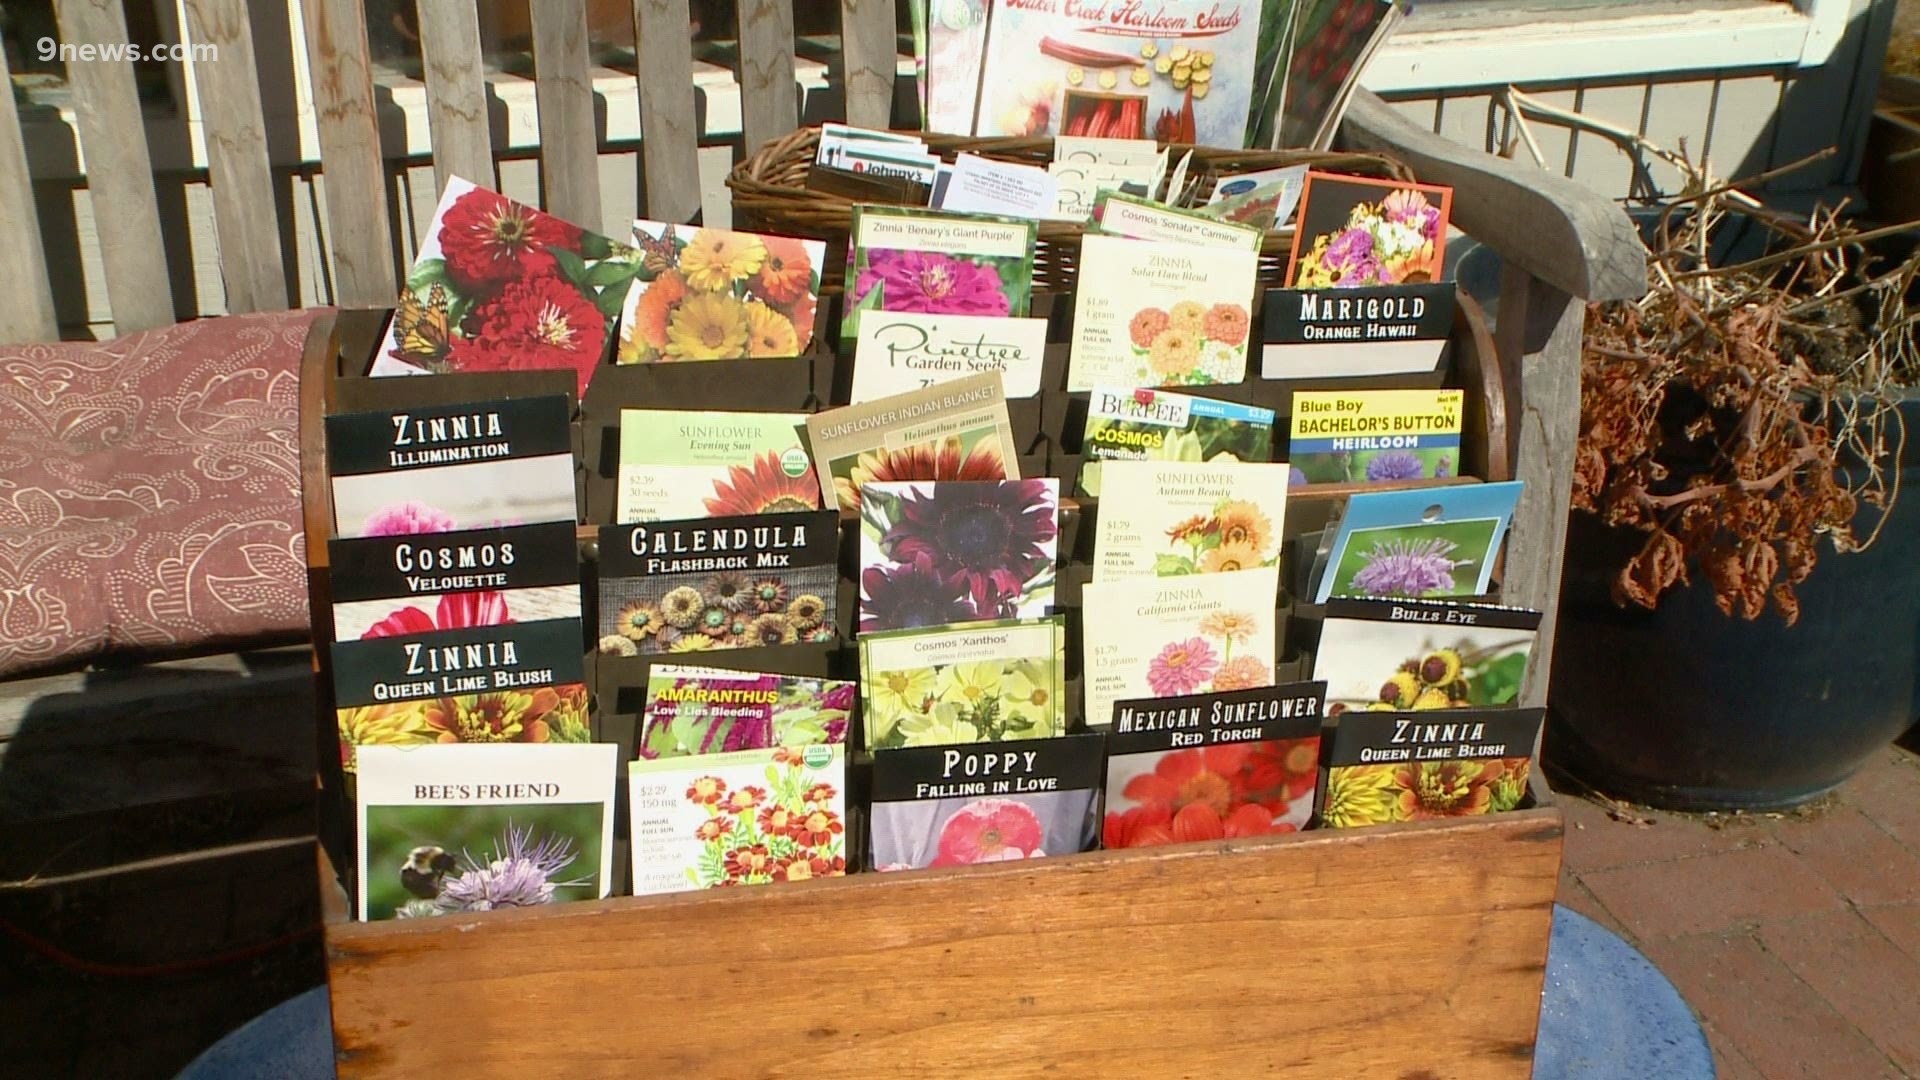 While garden centers and nurseries offer seeds, a seed catalog offers more choices for gardeners.